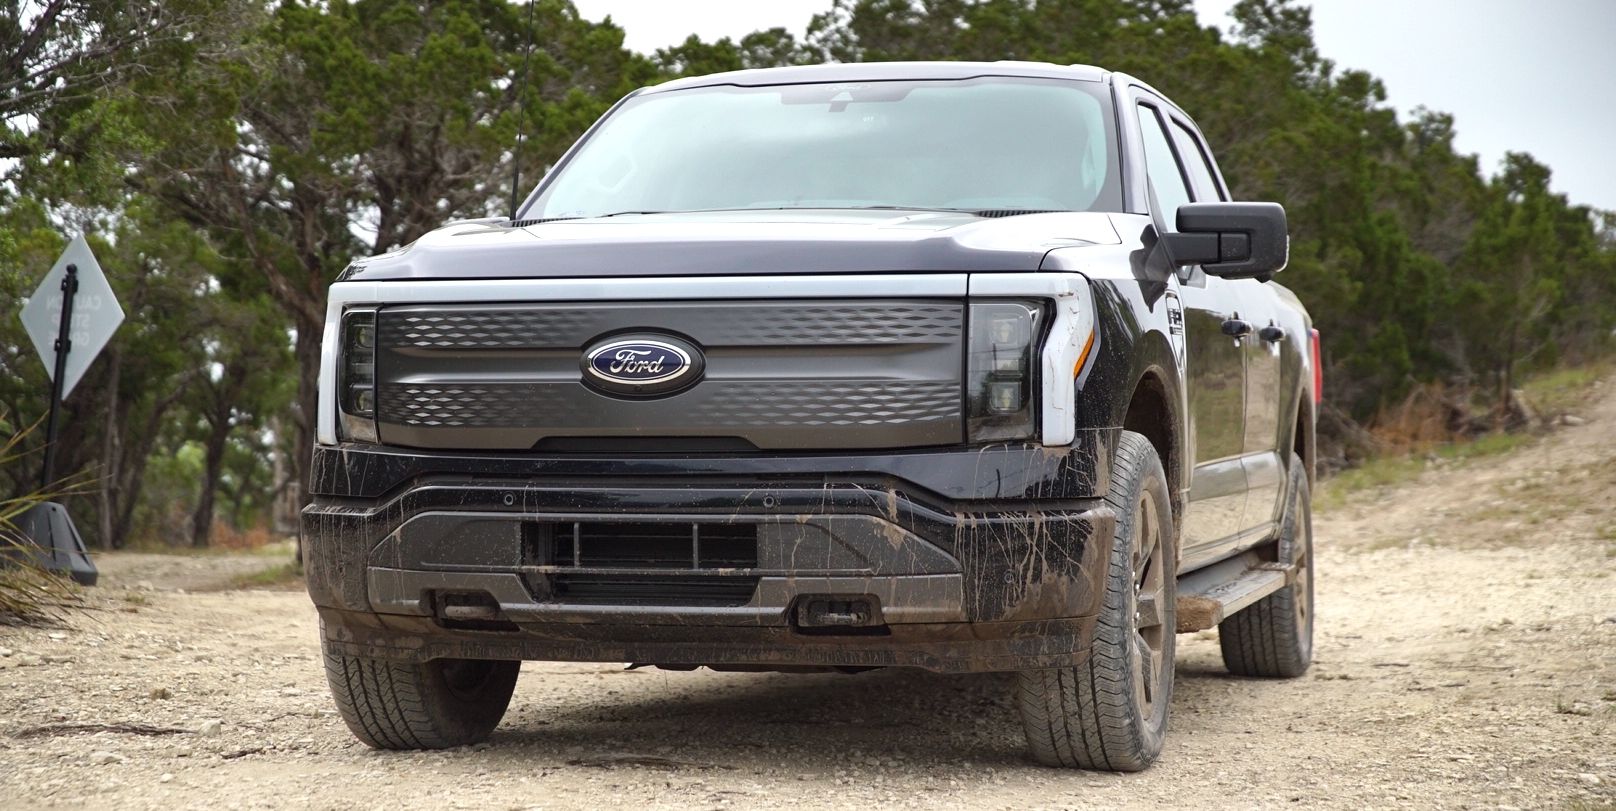 Ford Halts F-150 Lightning Production, Shipments Over Battery Issue